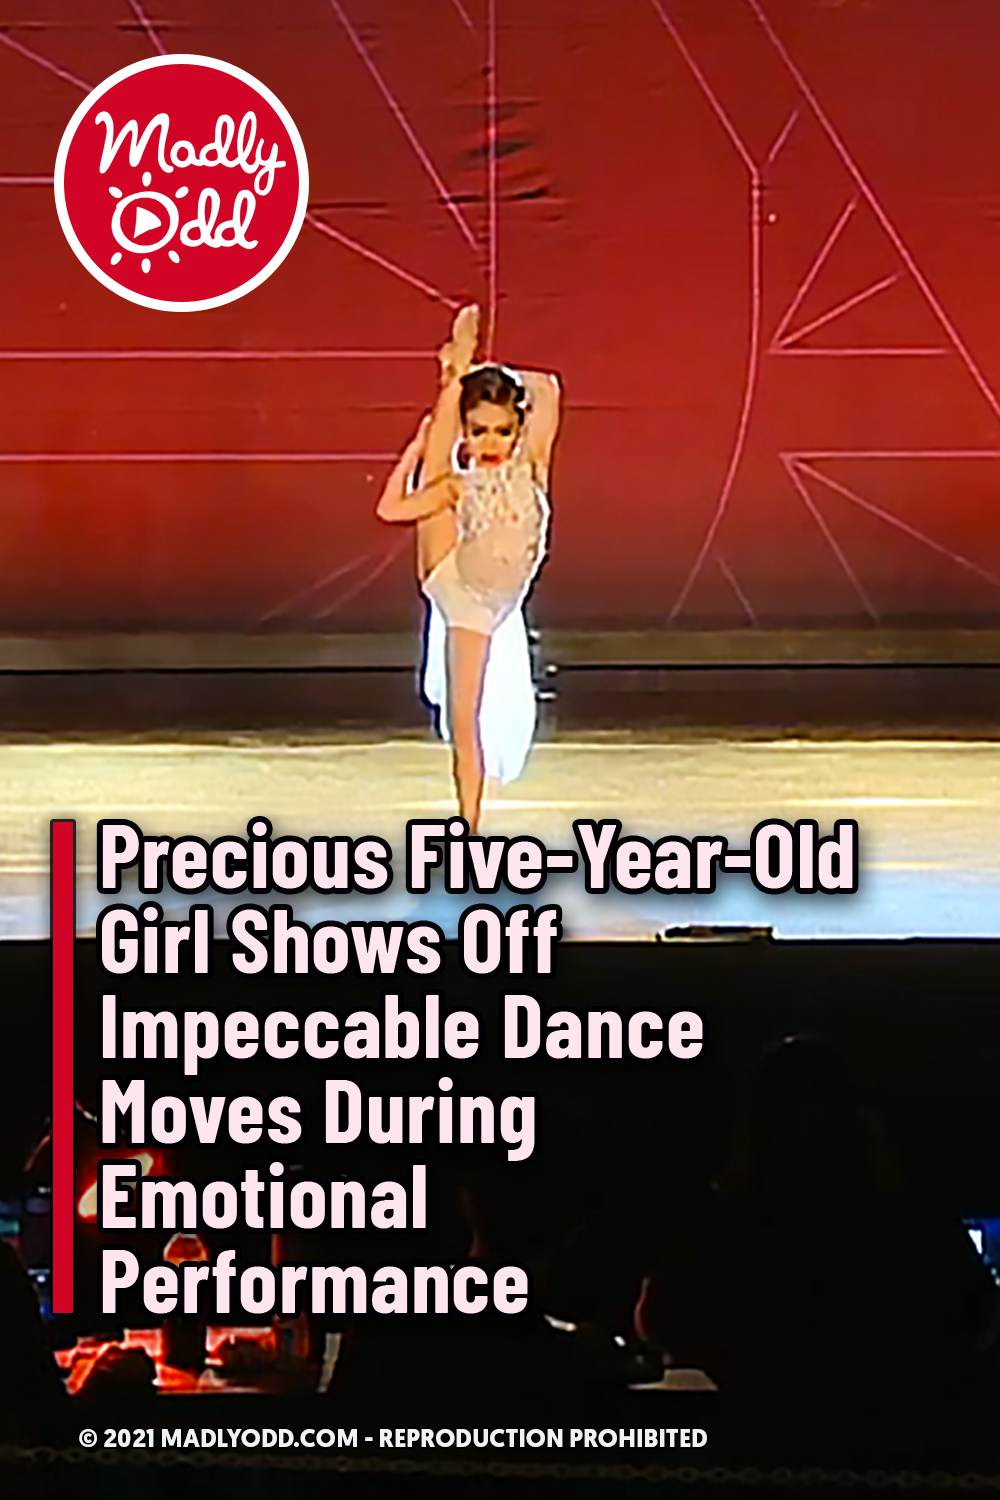 Precious Five-Year-Old Girl Shows Off Impeccable Dance Moves During Emotional Performance